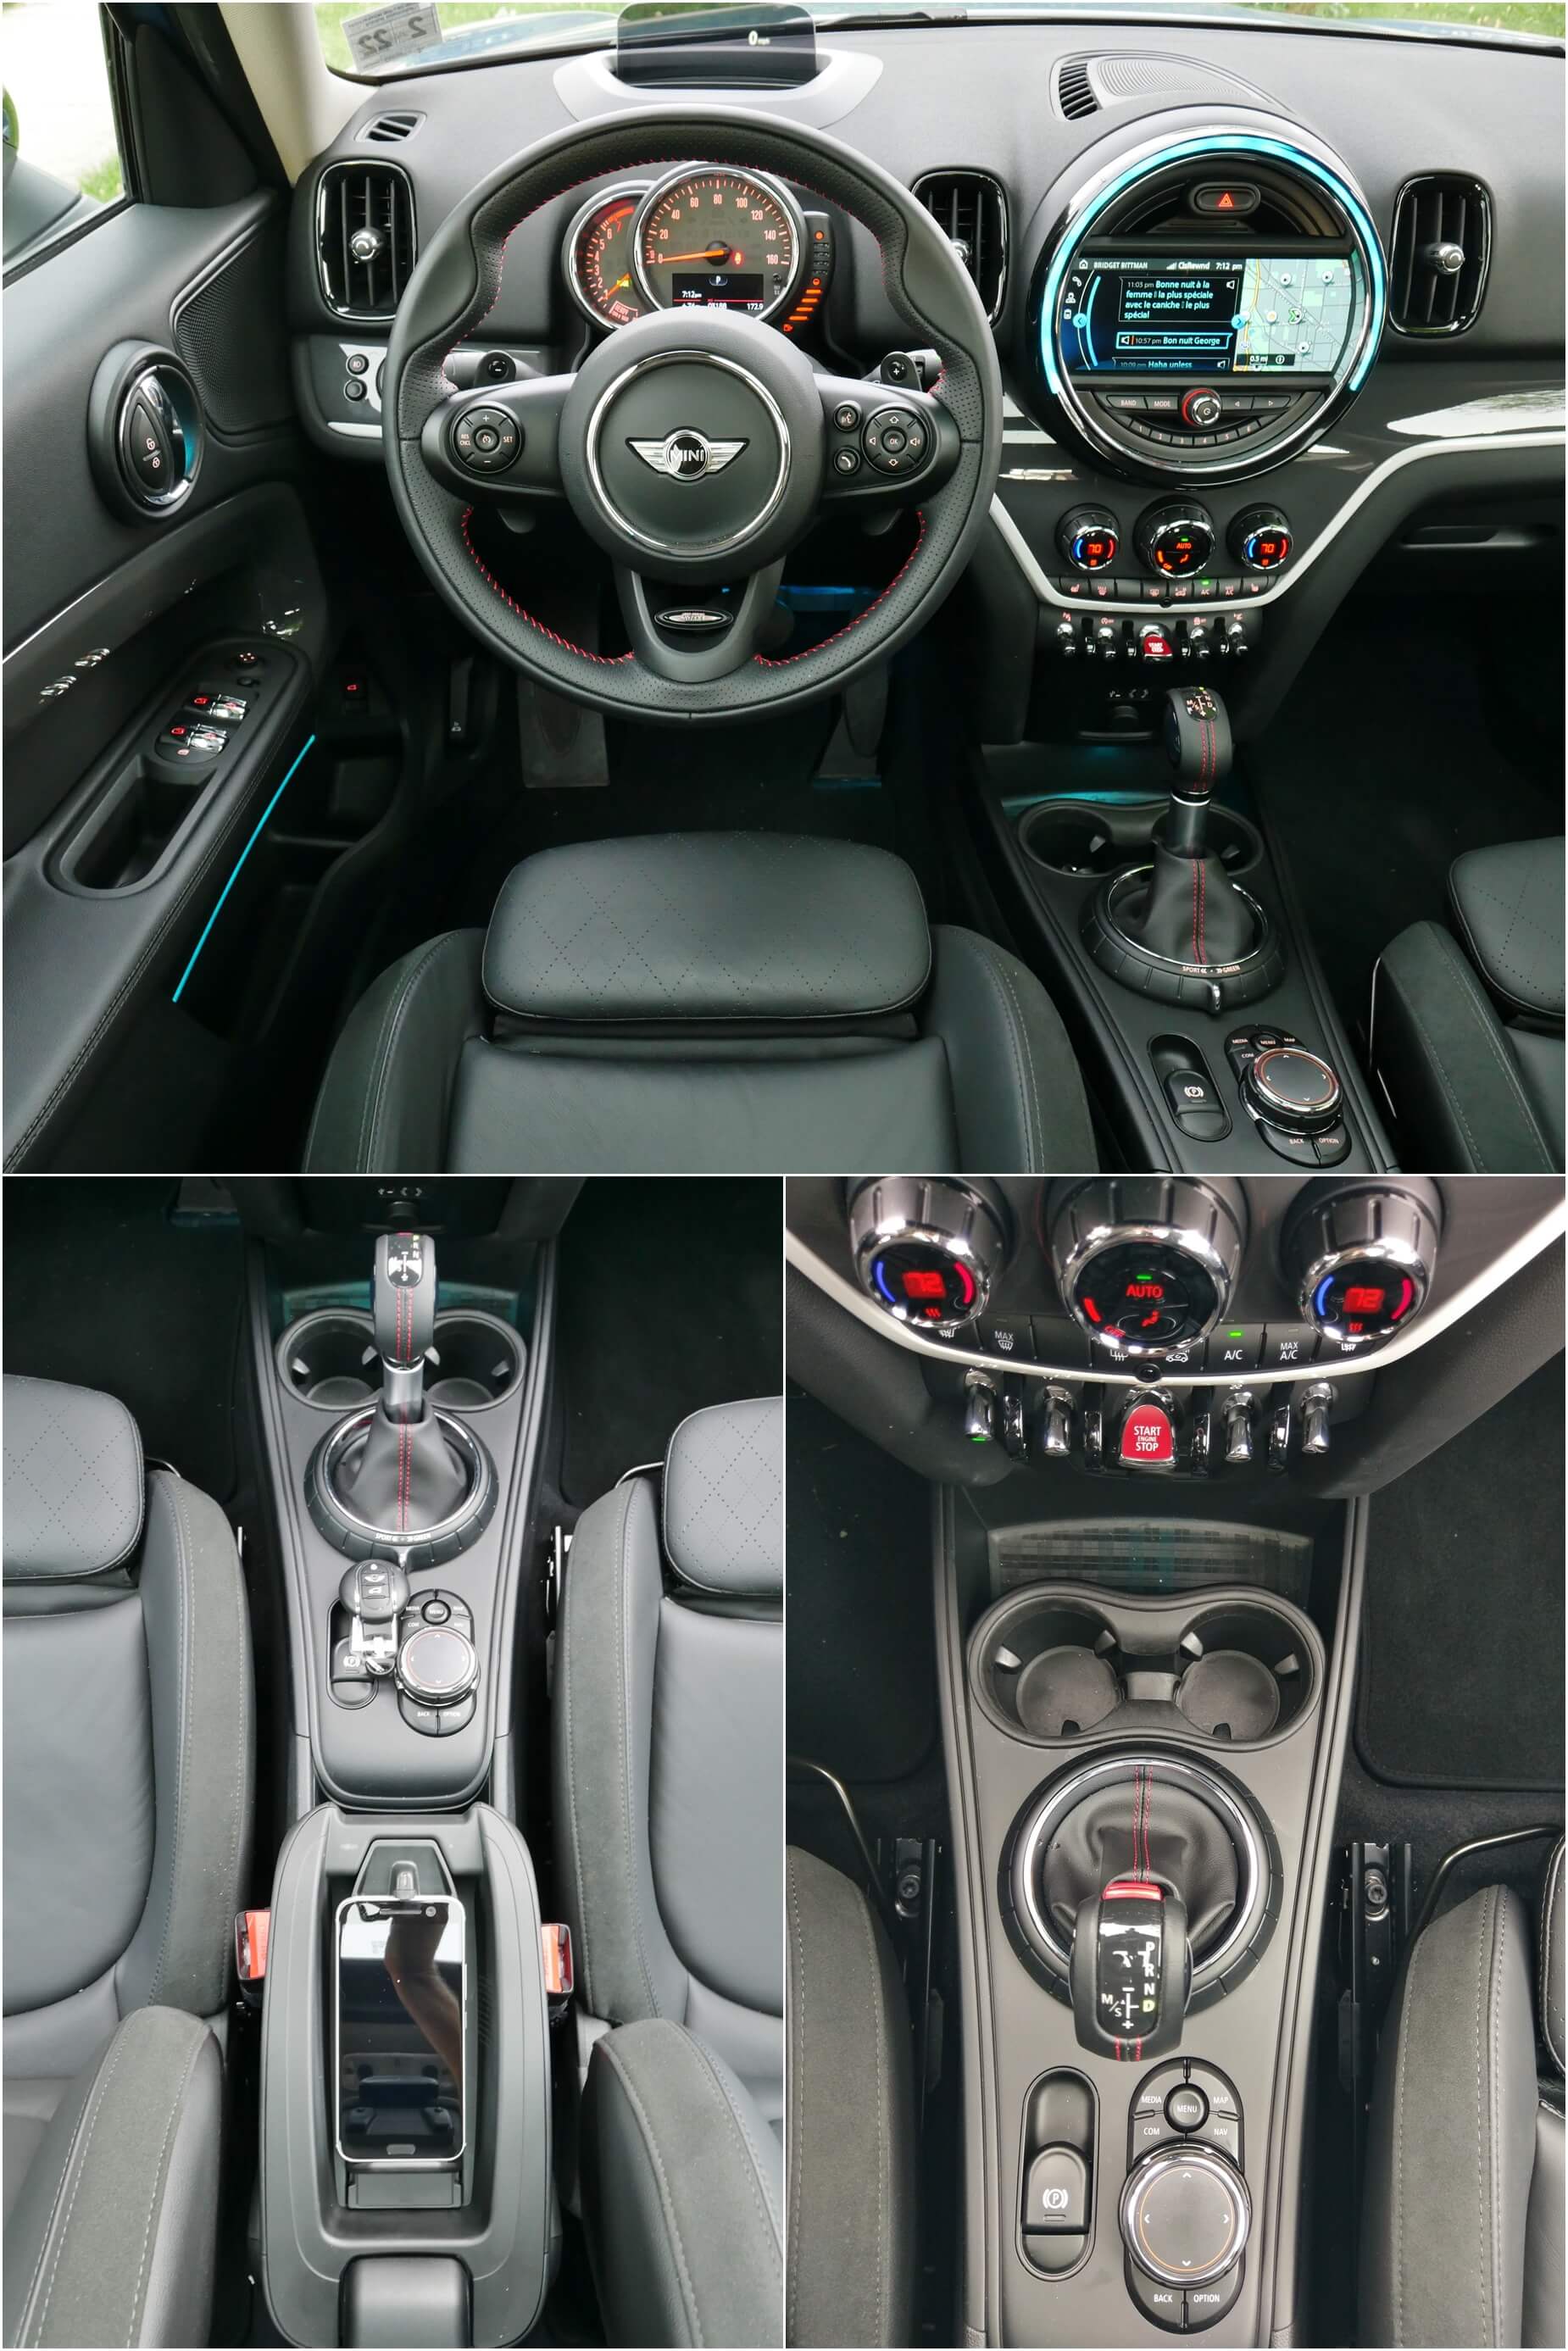 2017 MINI Cooper Countryman S All4: Cabin instruments, center console controls, including front center armrest integrated Qi wireless device inductive charger.